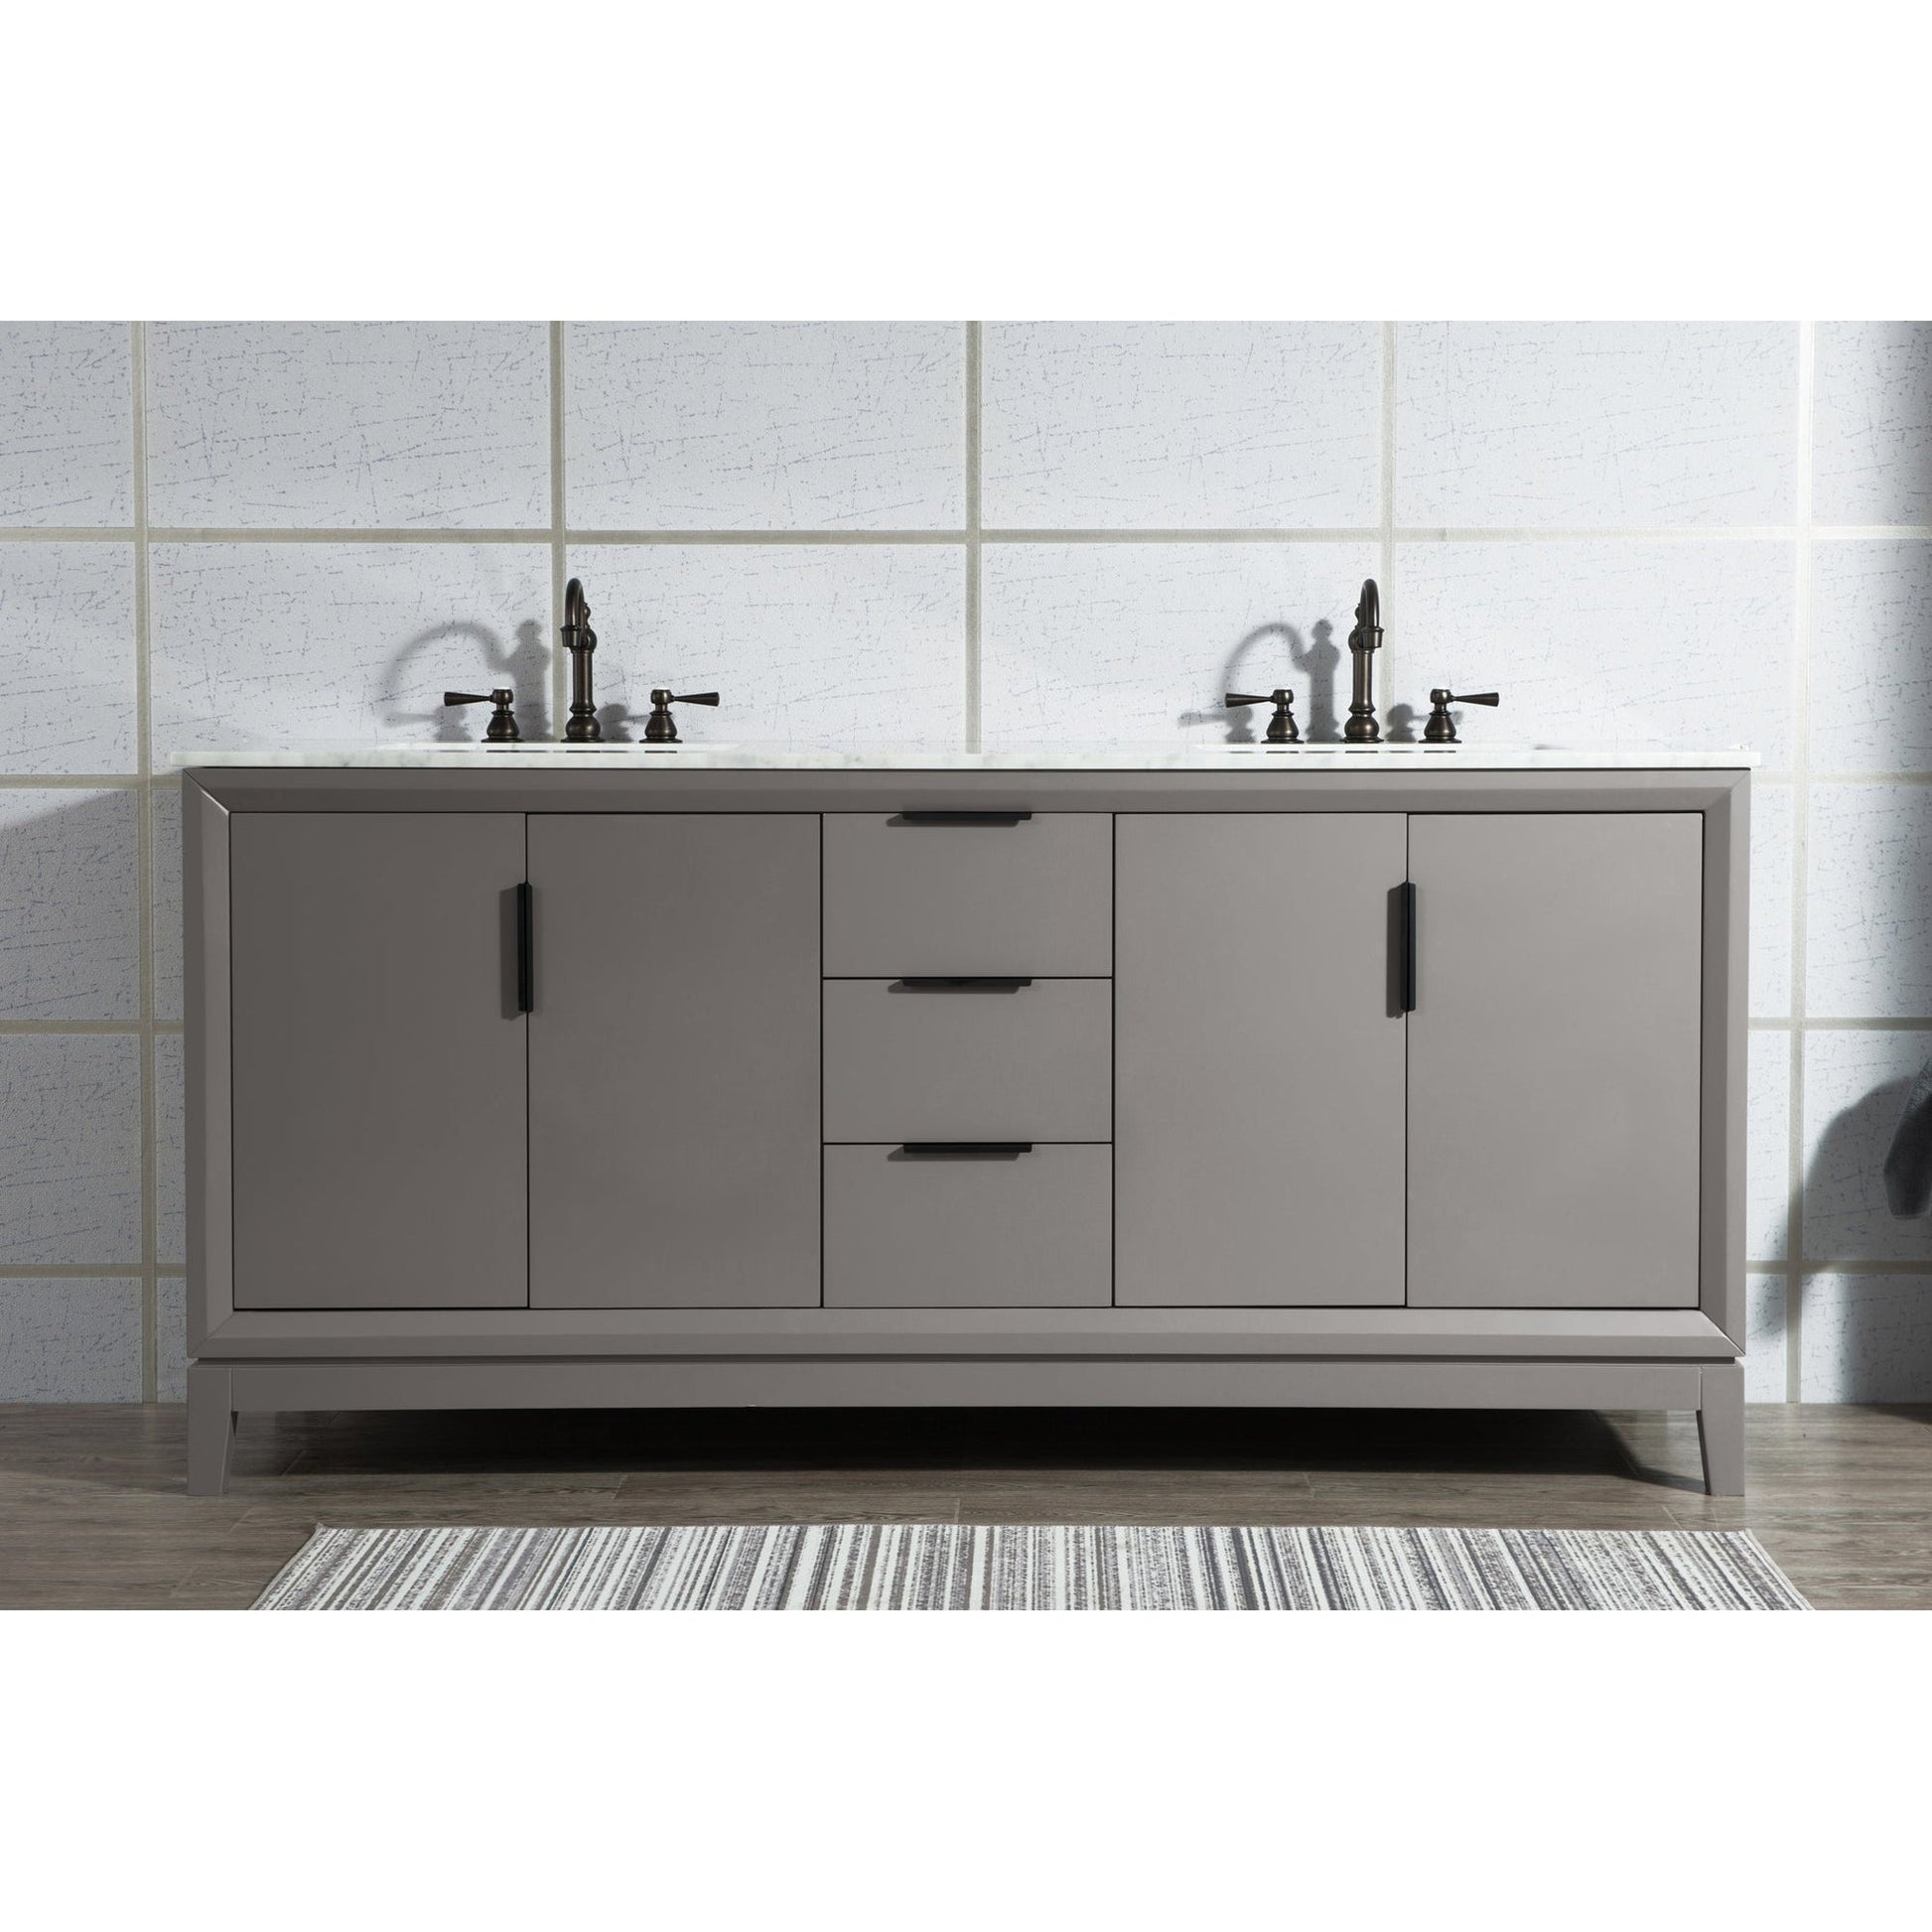 Water Creation Elizabeth 72" Double Sink Carrara White Marble Vanity In Cashmere Grey With F2-0012-03-TL Lavatory Faucet